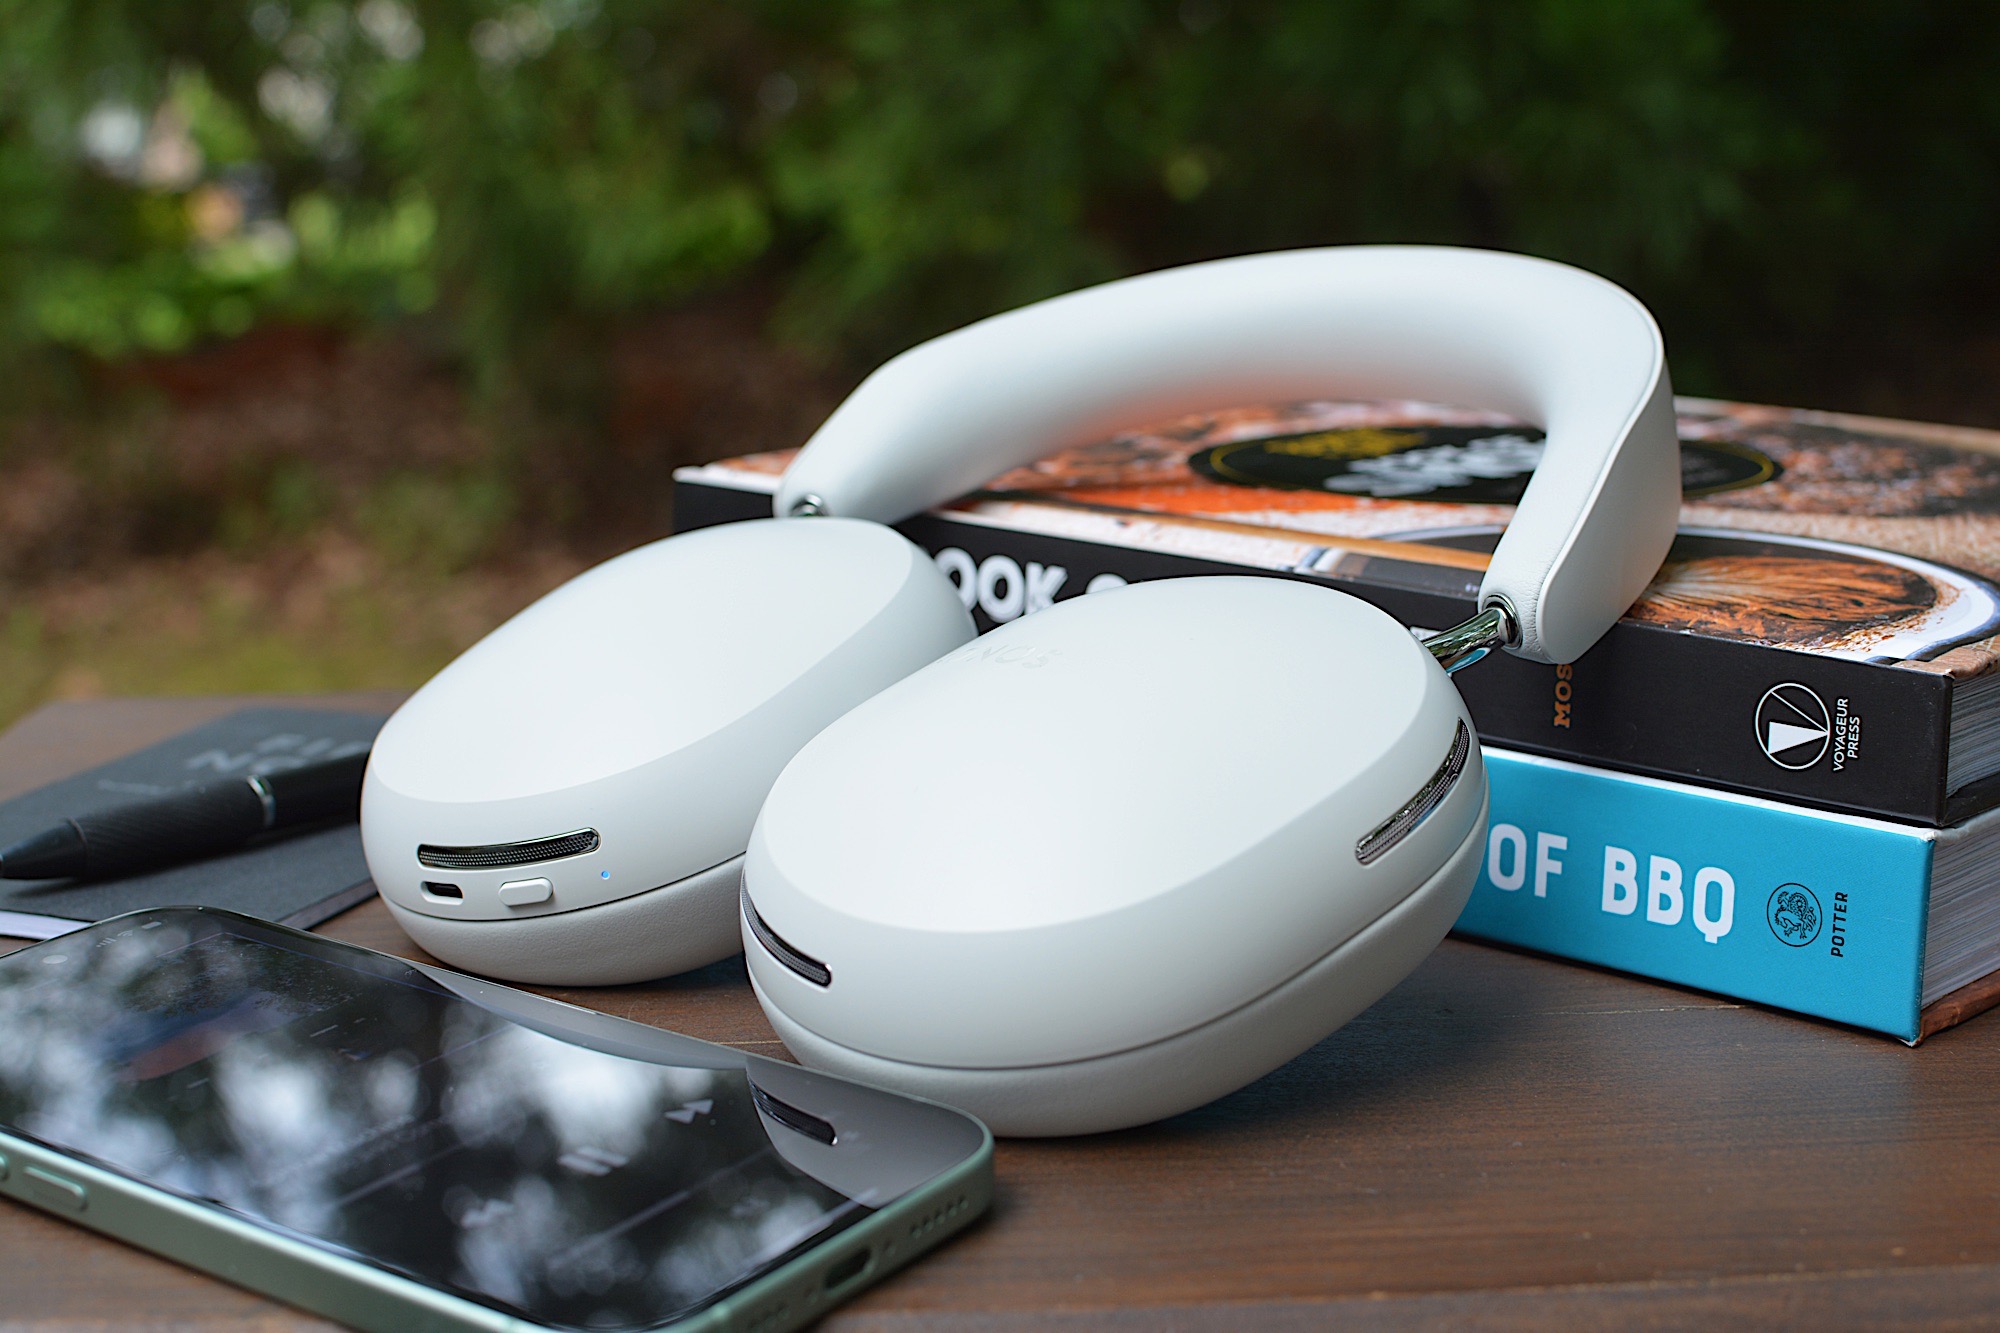 Design is a key aspect of premium headphones, and the Ace certainly looks the part. 